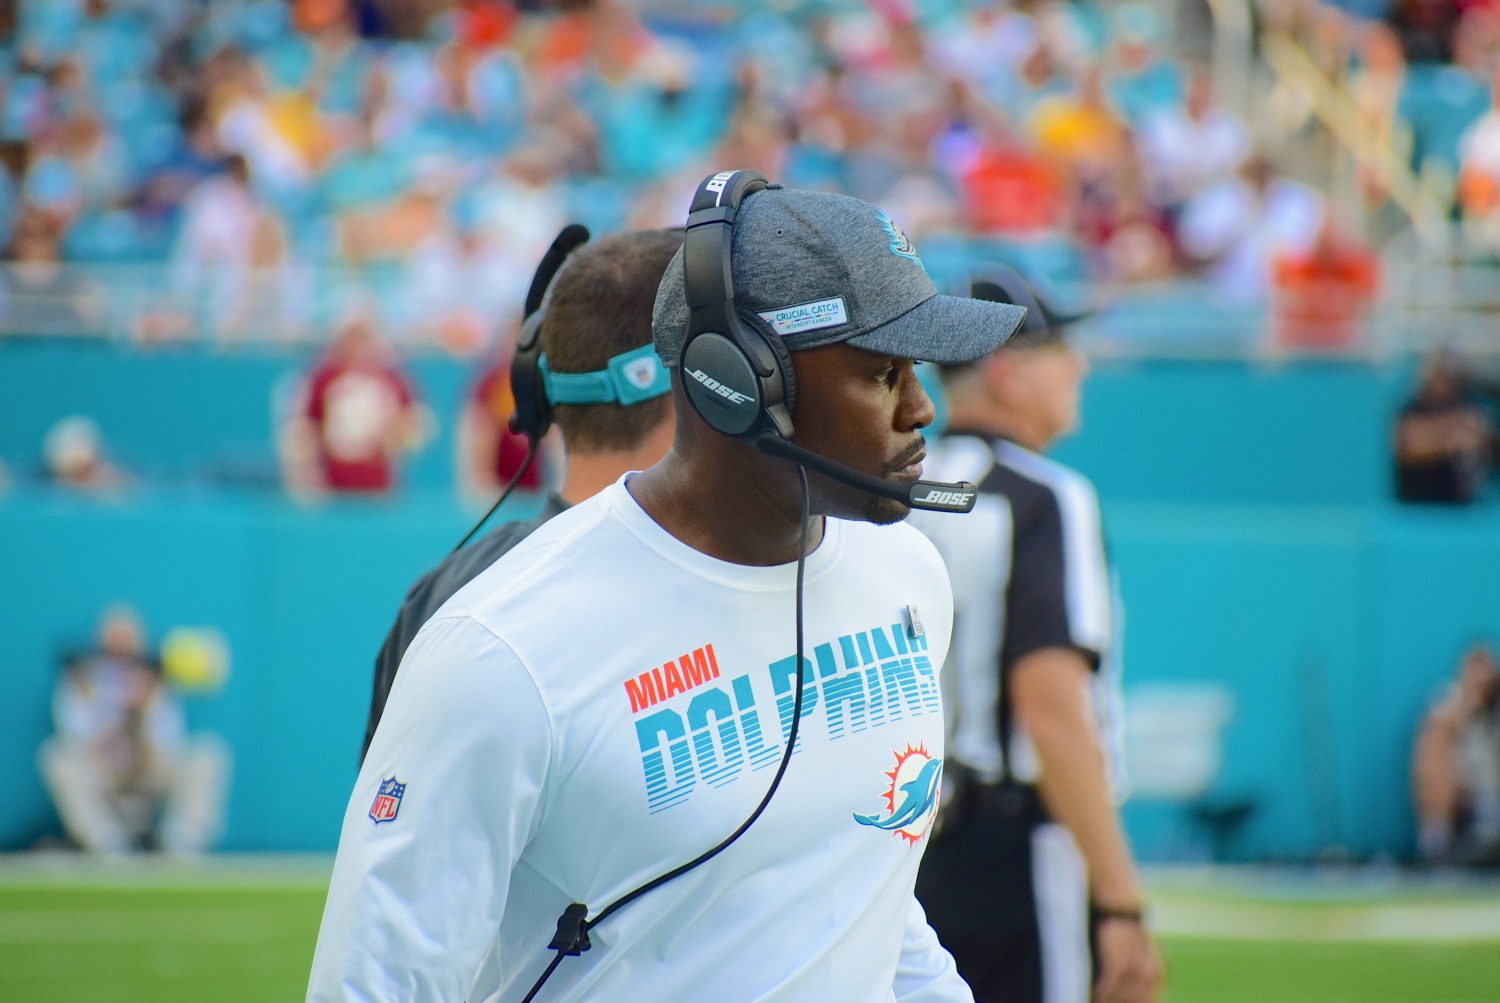 The Dolphins' free agent signings fit into coach Brian Flores' scheme. (Tony Capobianco for Five Reasons Sports)